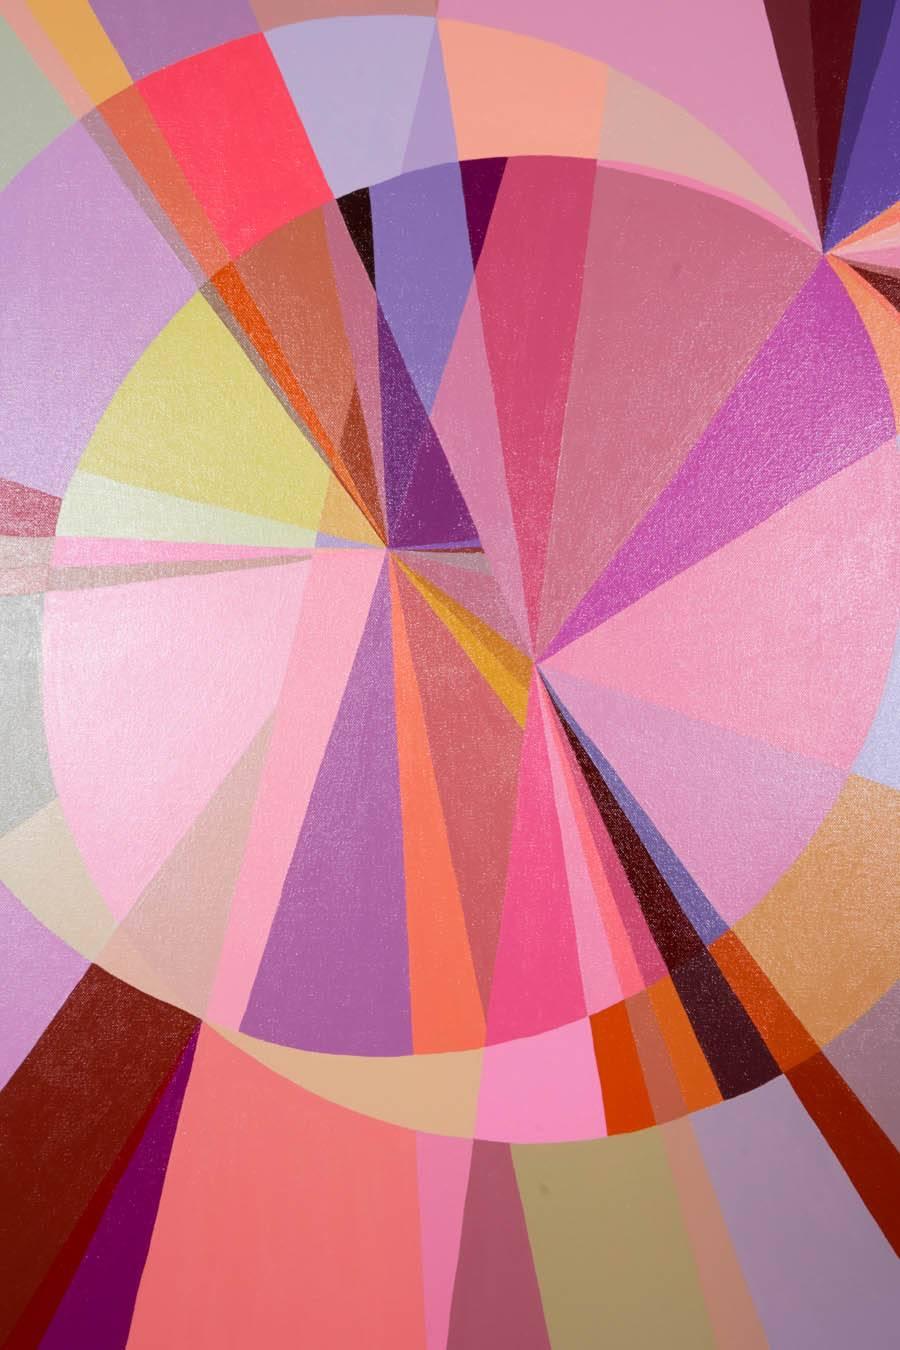 Las Venus is excited to be collaborating with Rome based artist C. Finley. This is one of two paintings shown exclusively in our showroom and is a fine example of her expression. Finley is known for her elaborate geometric paintings, skillful use of